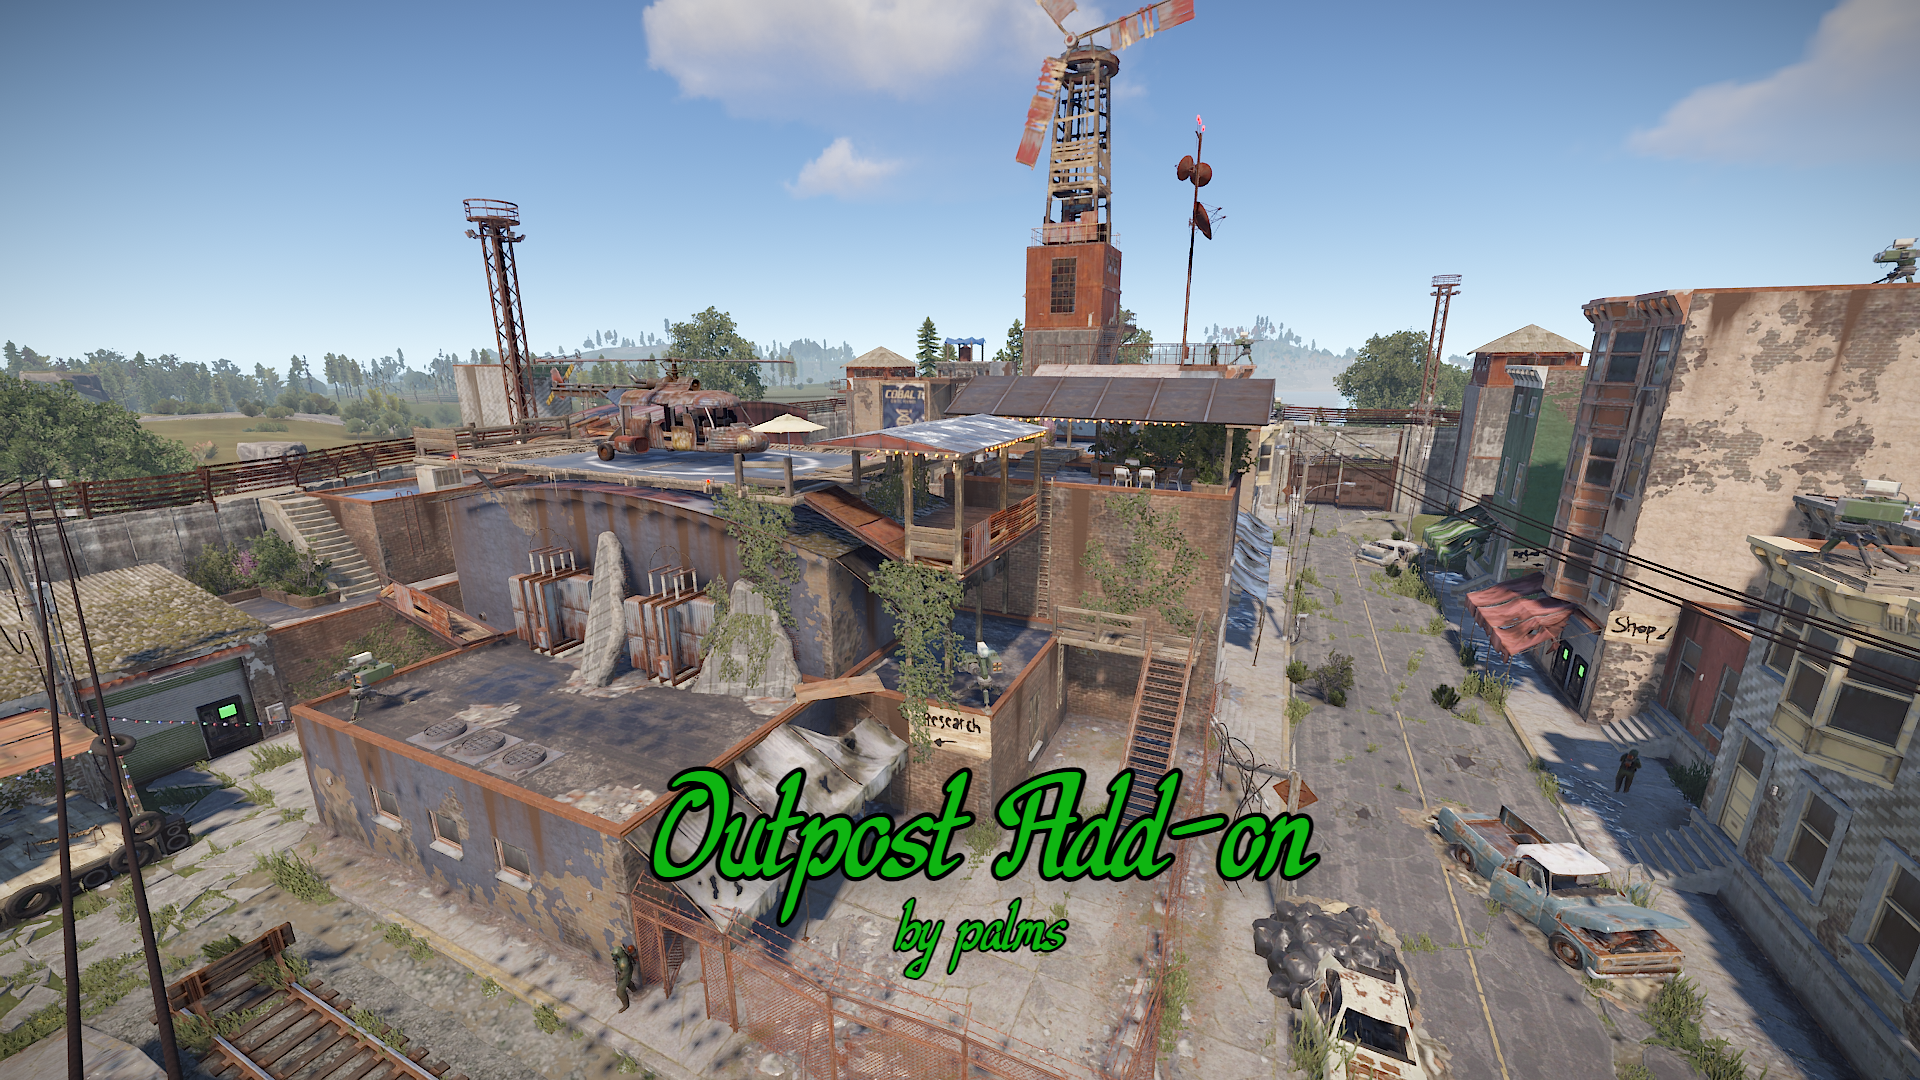 Outpost Add-on